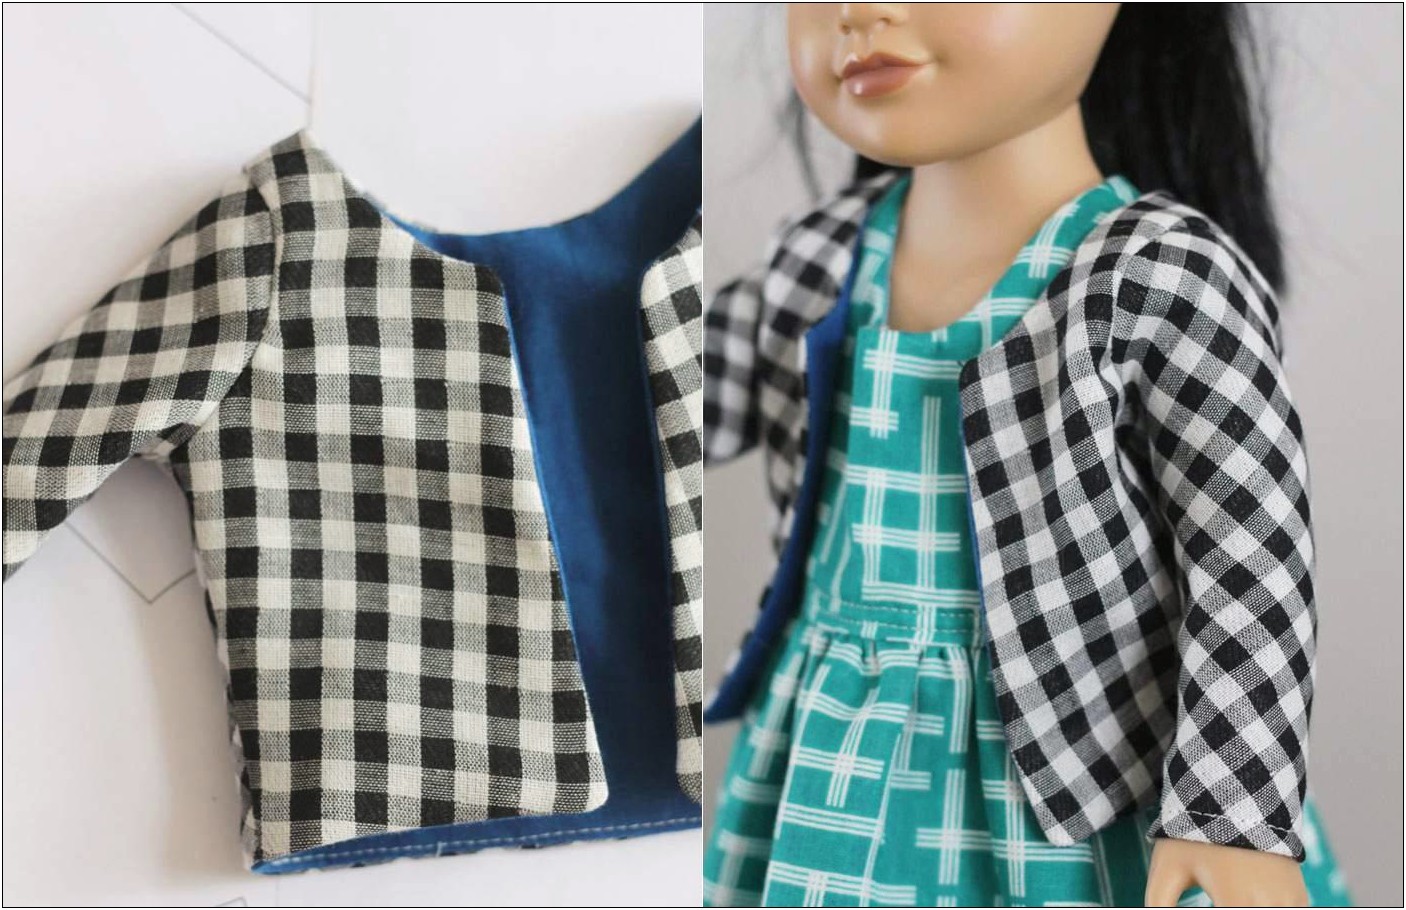 Free Template For Childs Cloth Scrub Shirt